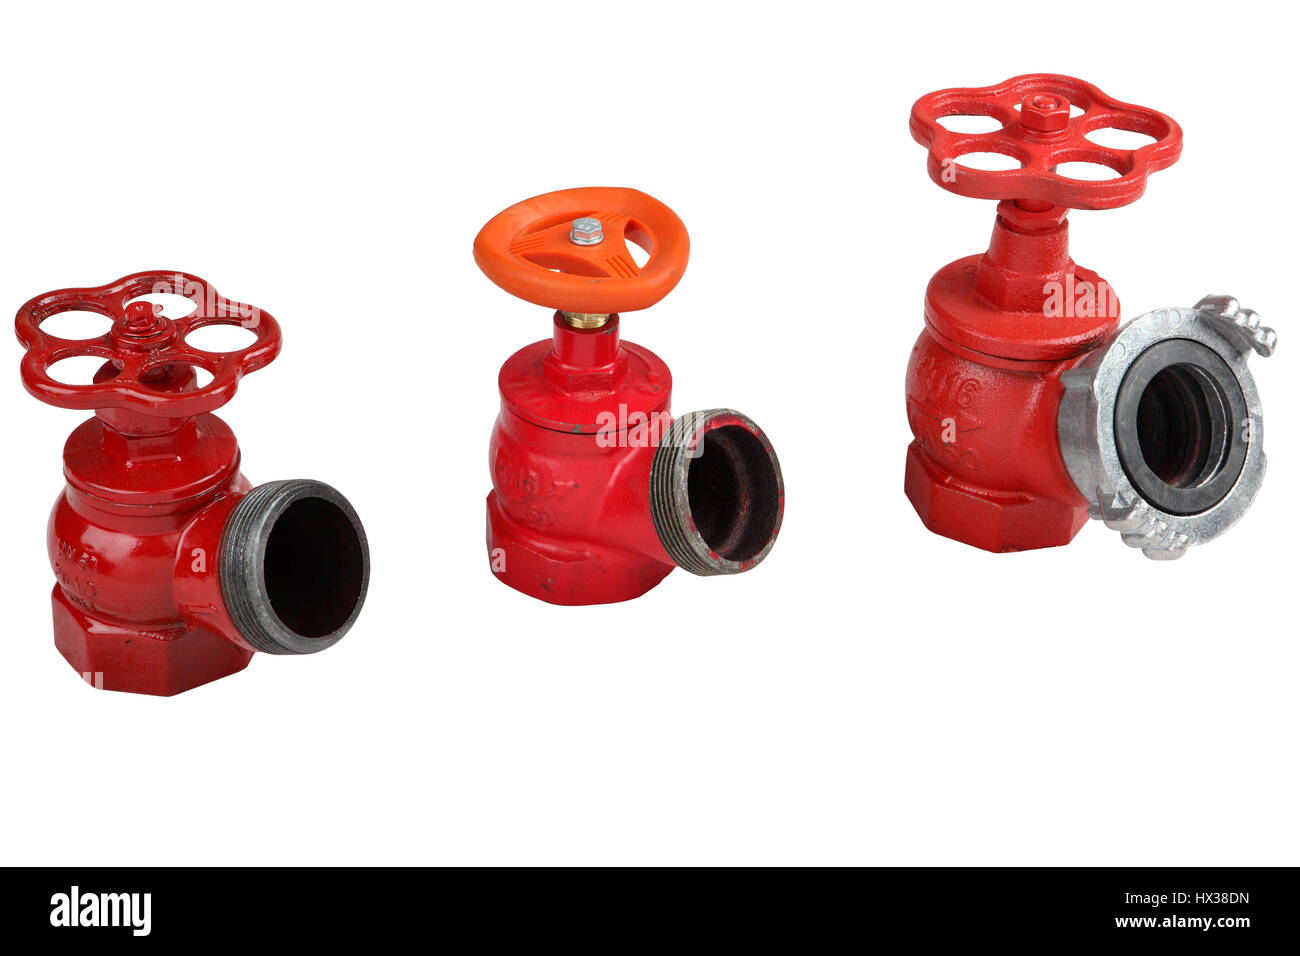 Fire Hydrant Valve Hose, set of three red fire hydrants, for